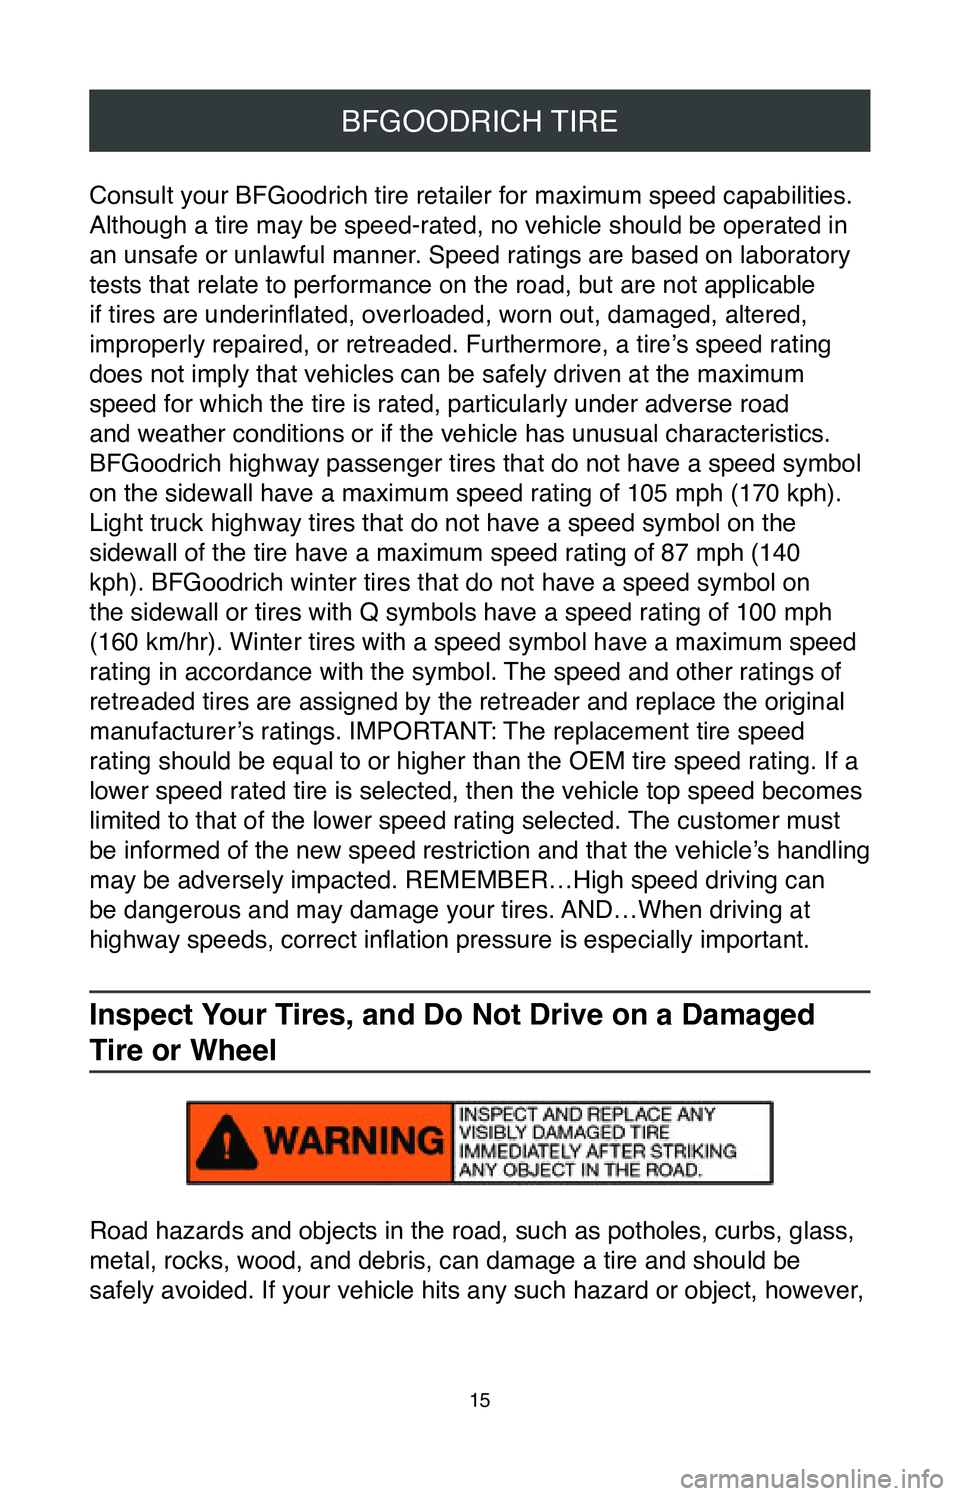 TOYOTA COROLLA HYBRID 2020  Warranties & Maintenance Guides (in English) 15
BFGOODRICH TIRE
Consult your BFGoodrich tire retailer for maximum speed capabilities. 
Although a tire may be speed-rated, no vehicle should be operated in 
an unsafe or unlawful manner. Speed rati